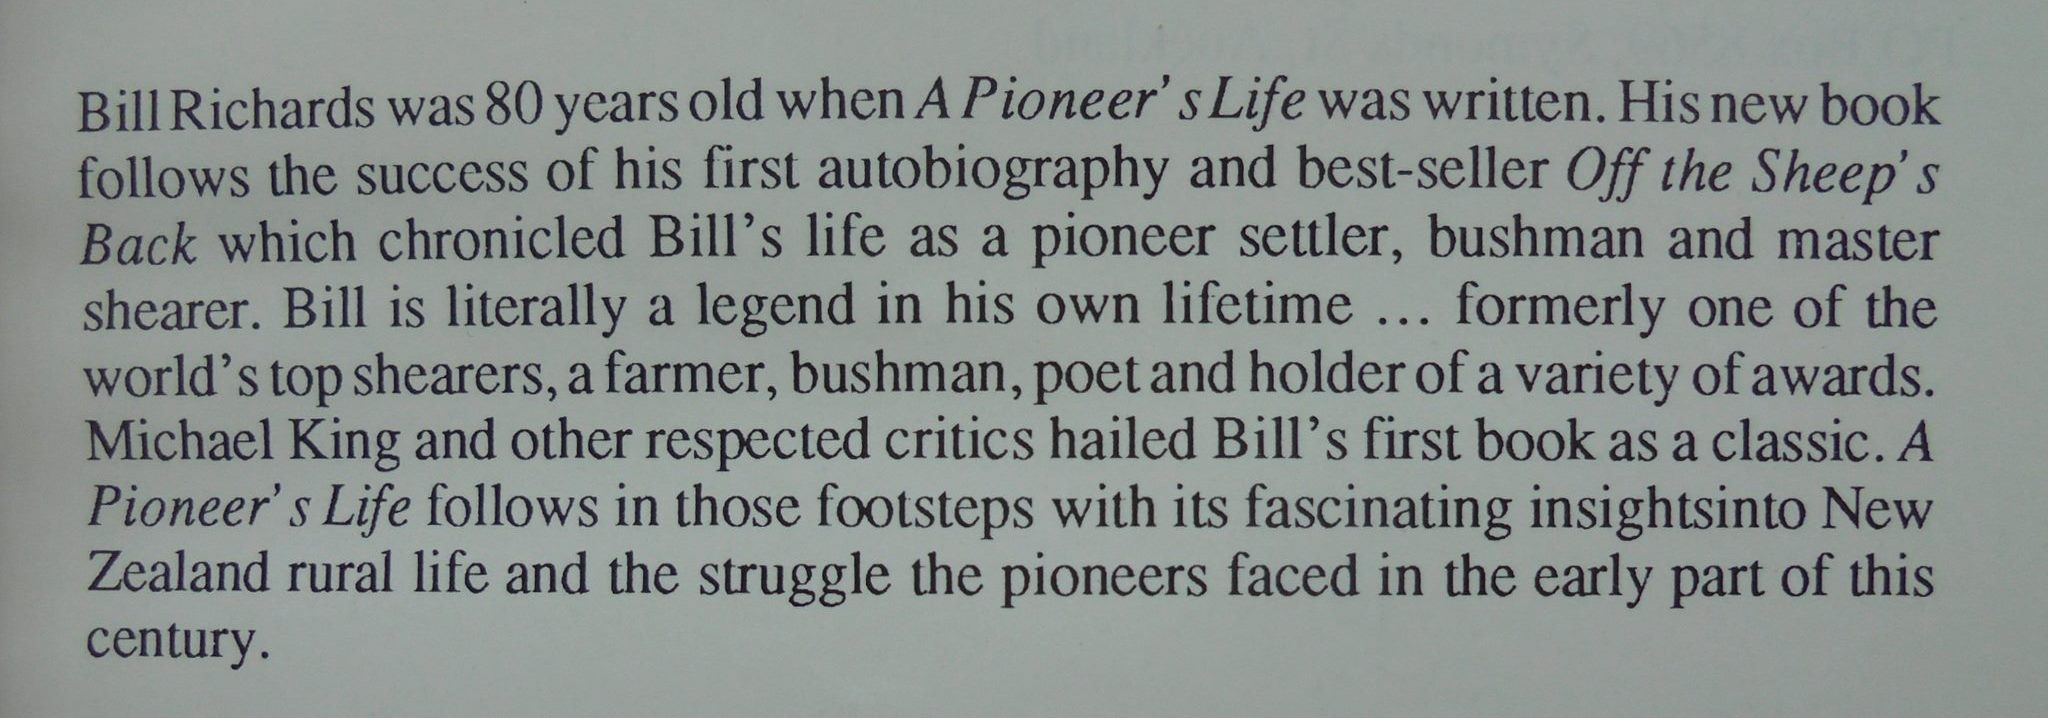 A Pioneer's Life. By BILL RICHARDS